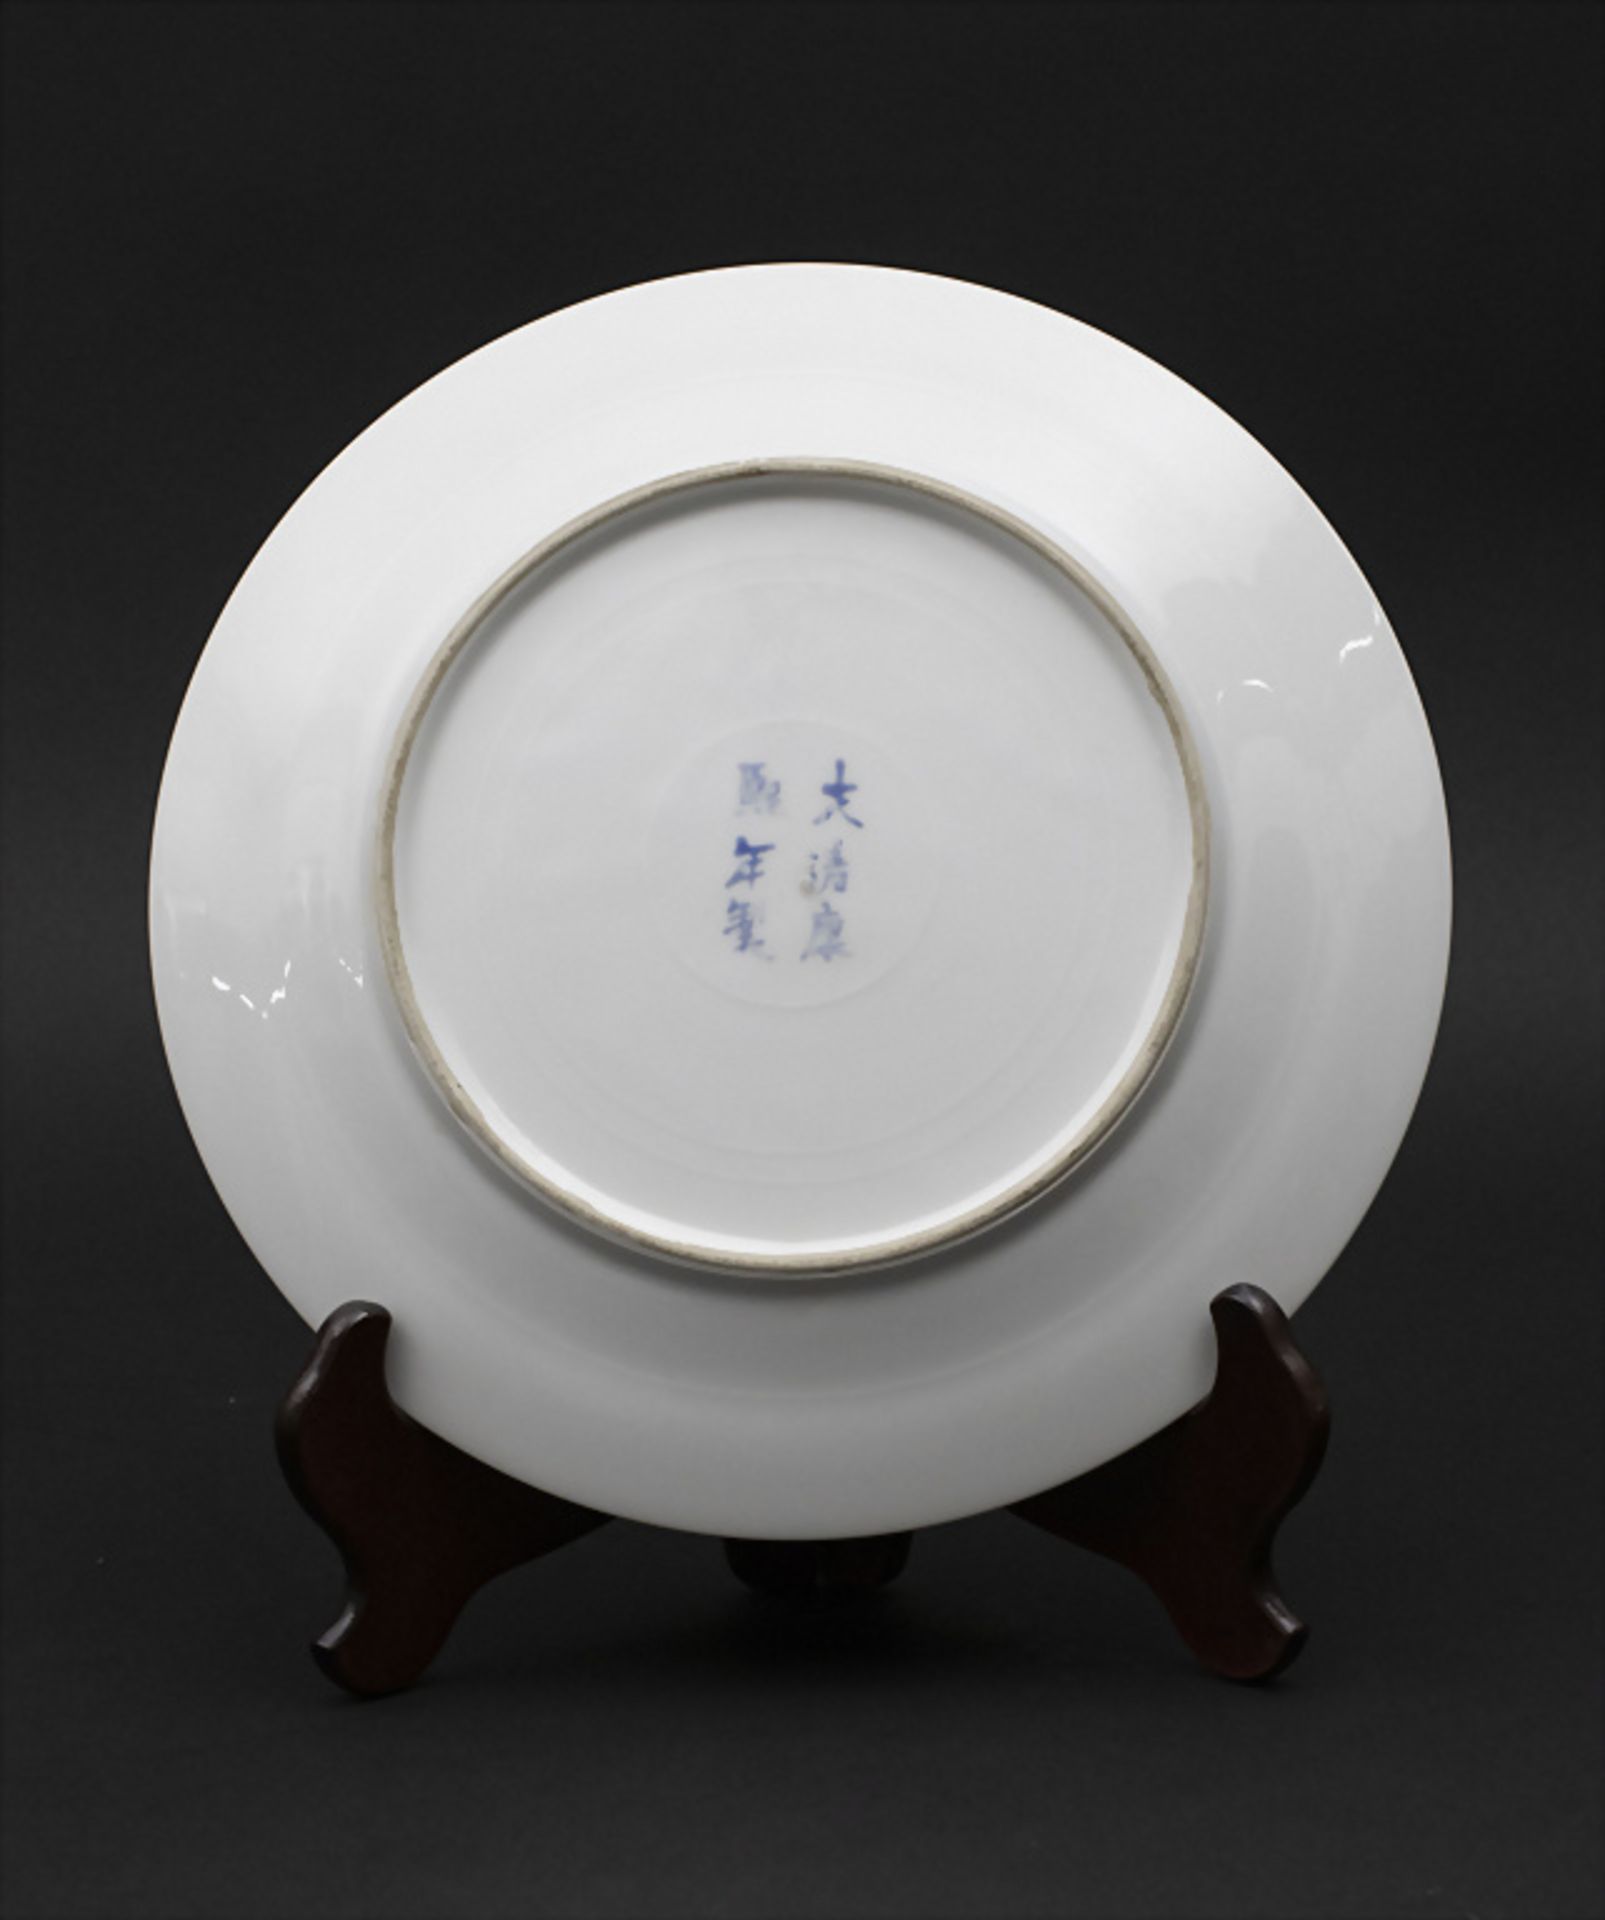 Teller / A porcelain plate, China, Qing Dynastie (1644-1911), Ende 19. Jh. - Image 2 of 5